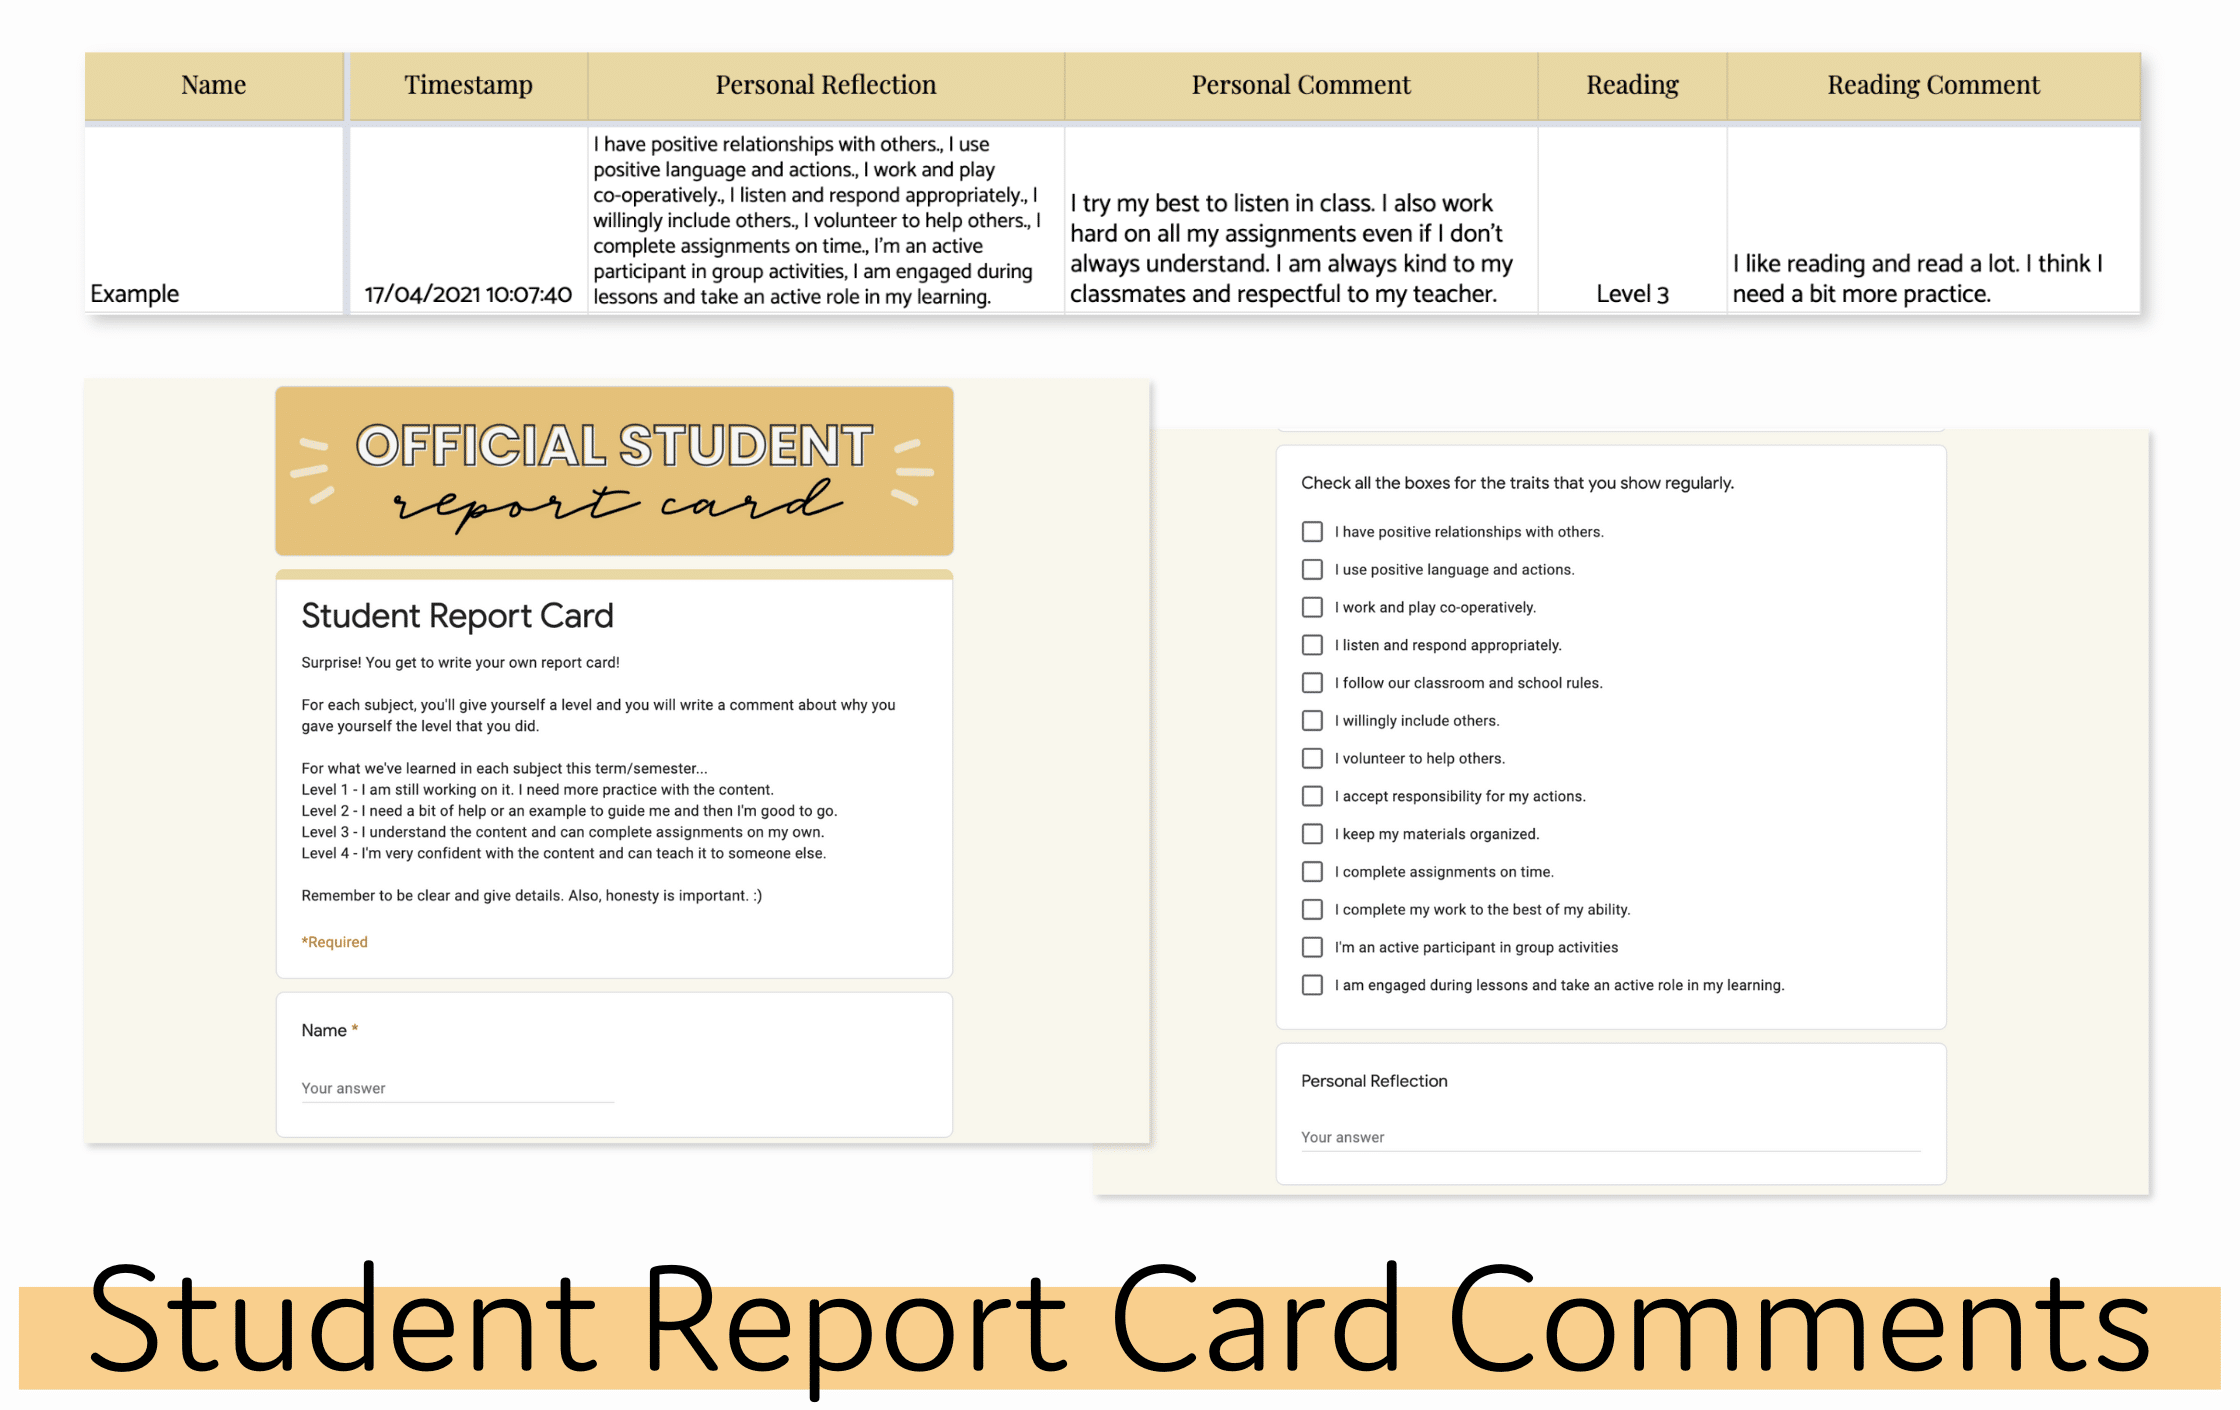 Student Report Card Comments as a form of student self assessment leading up to report card season Showing the Google Form that students fill in as well an example of student reponses